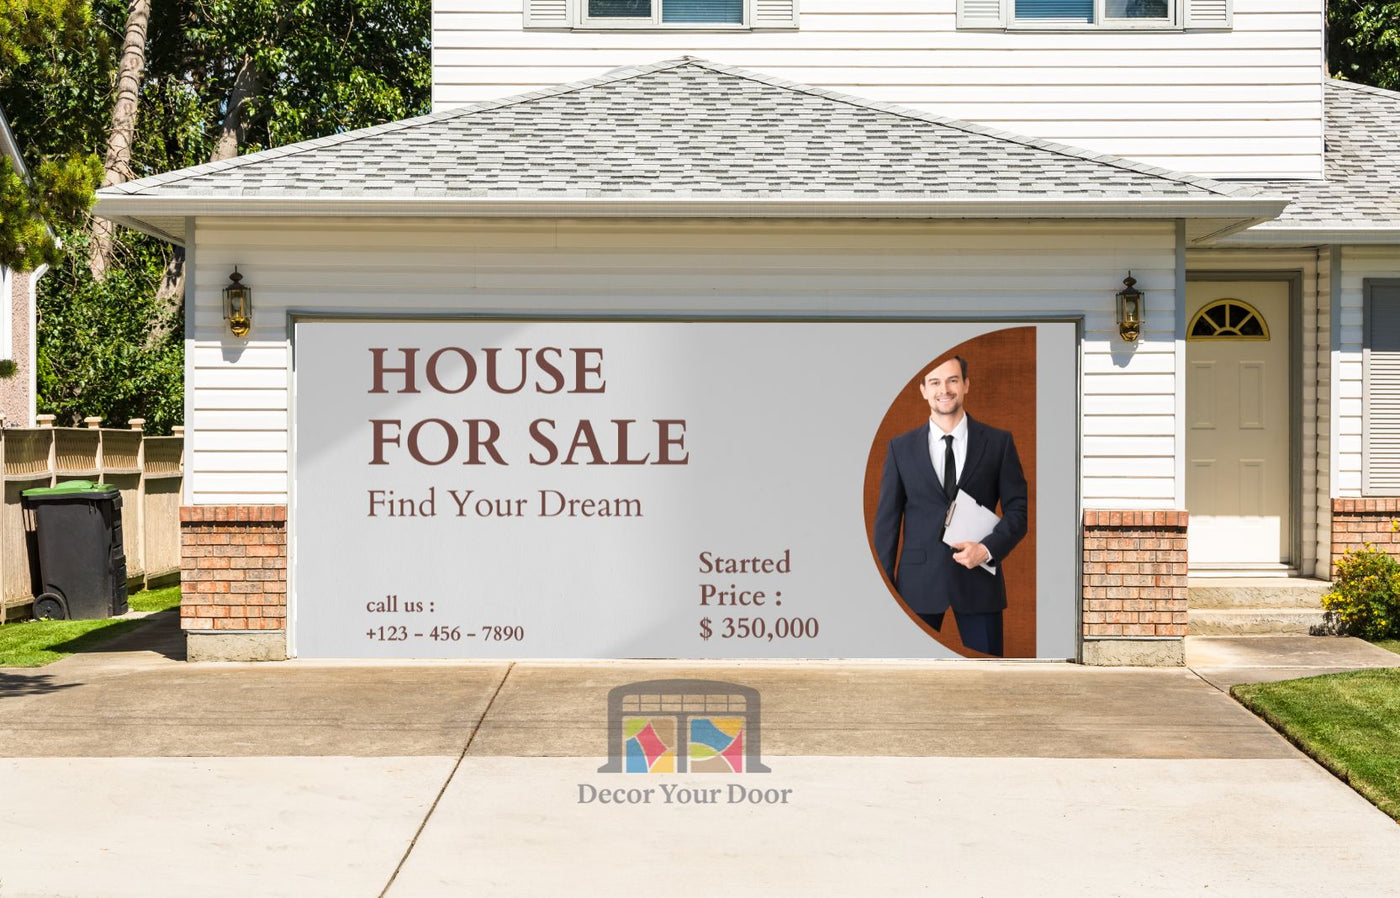 House For Sale Garage Door Cover Wrap Backdrop